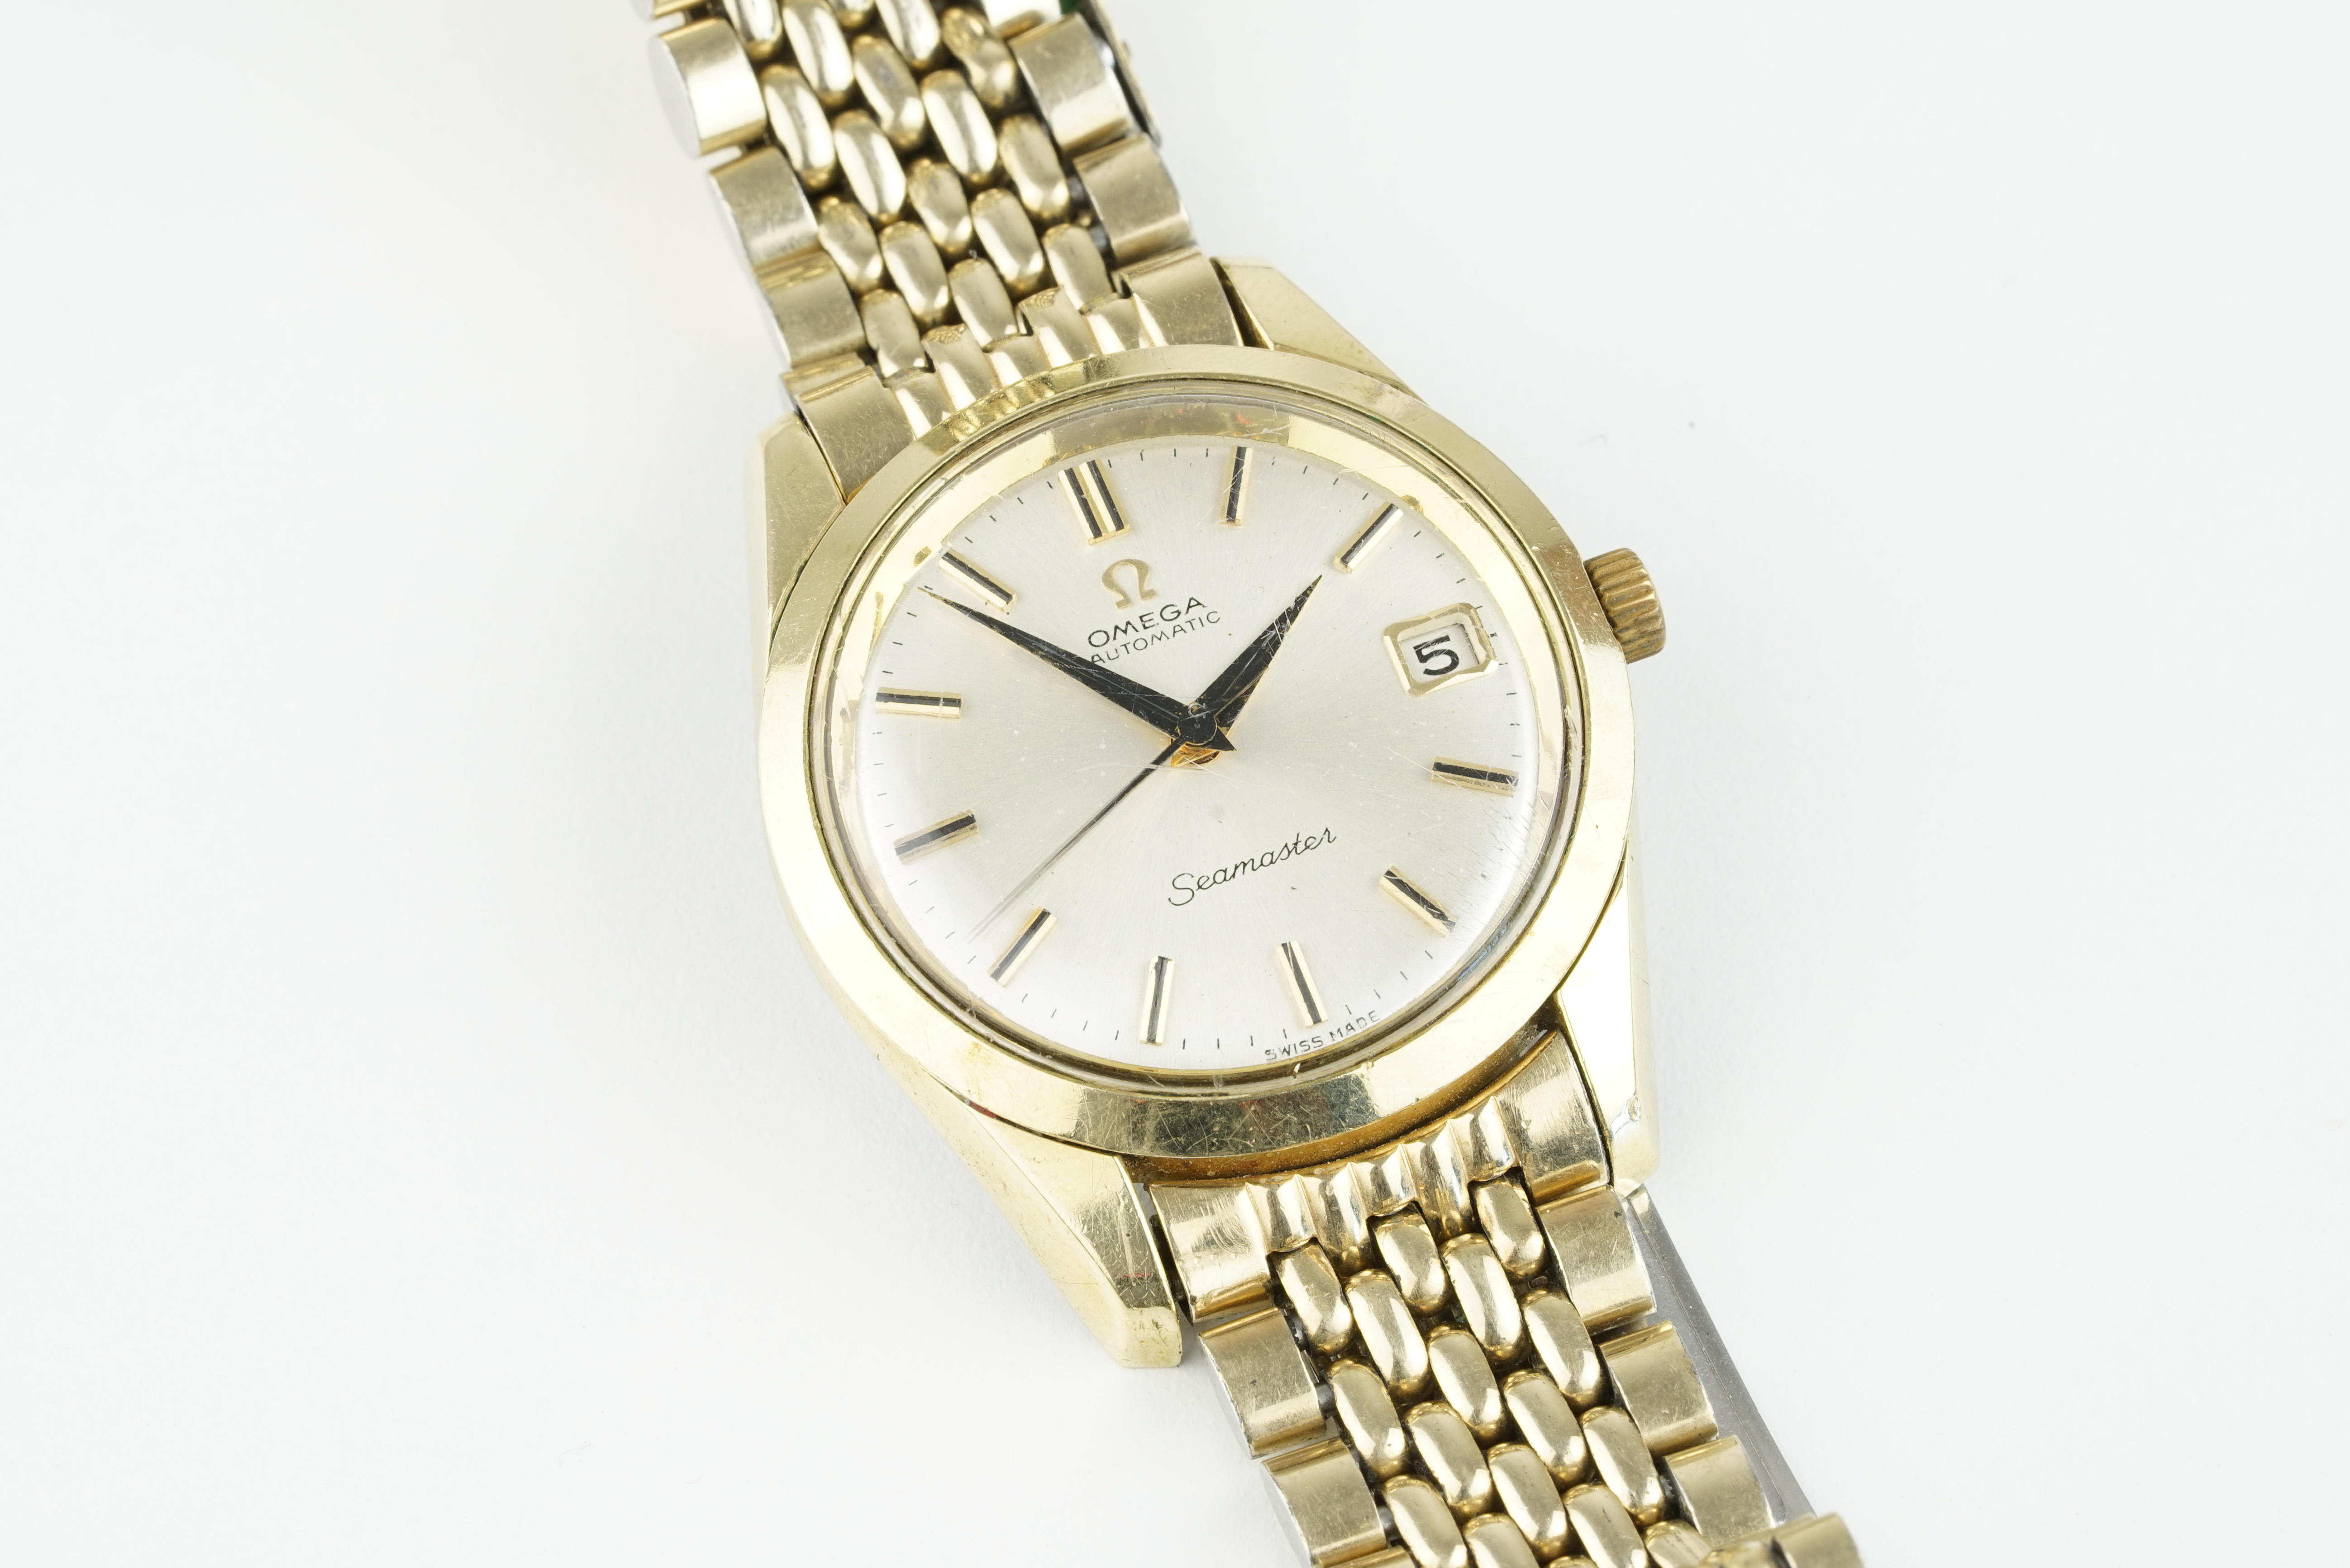 OMEGA AUTOMATIC SEAMASTER DATE GOLD PLATED WRISTWATCH, circular silver dial with baton hour